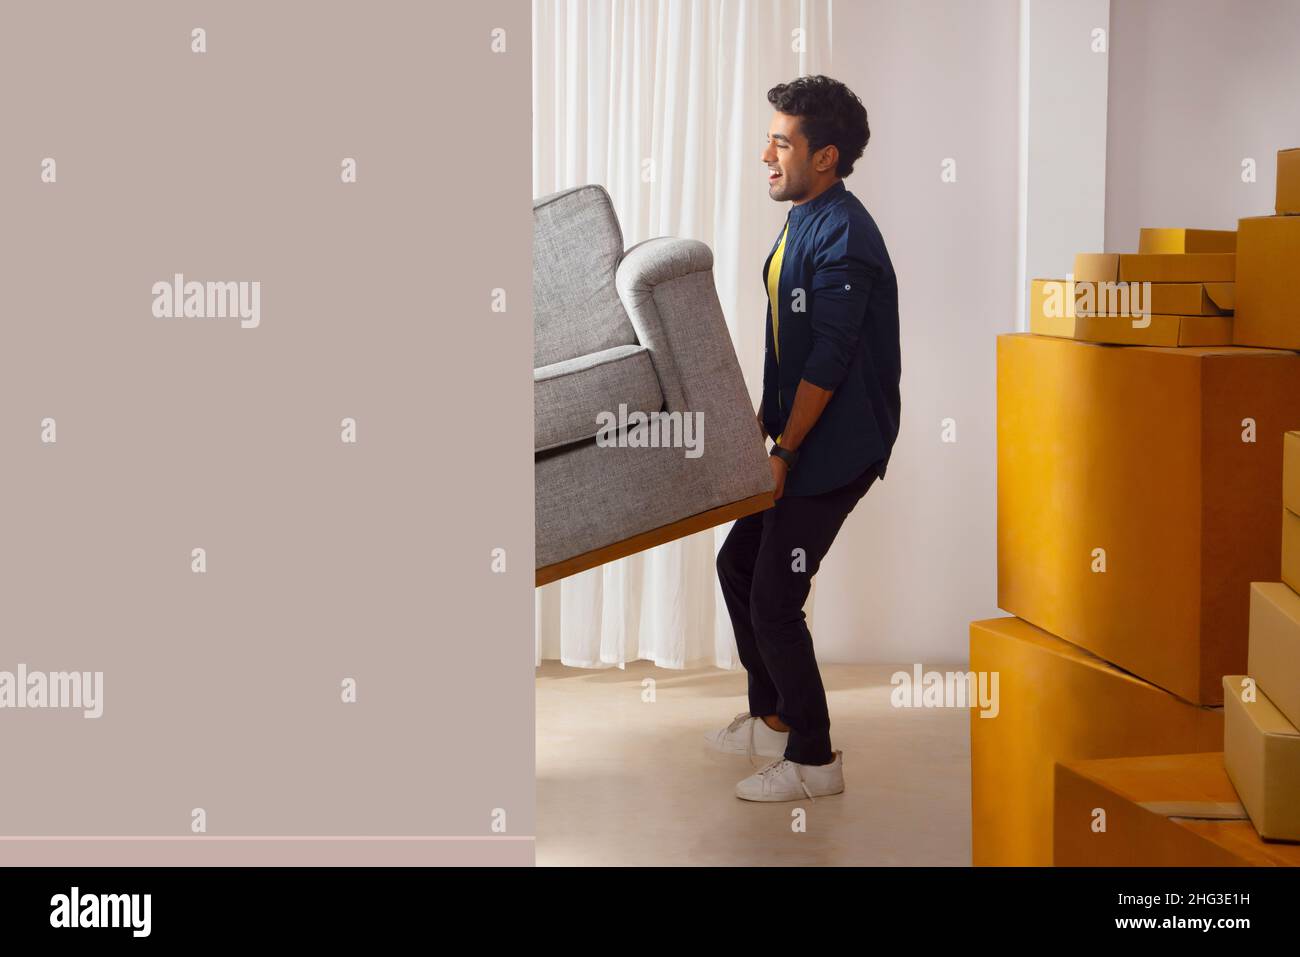 Adult boy lifting sofa and trying to move Stock Photo